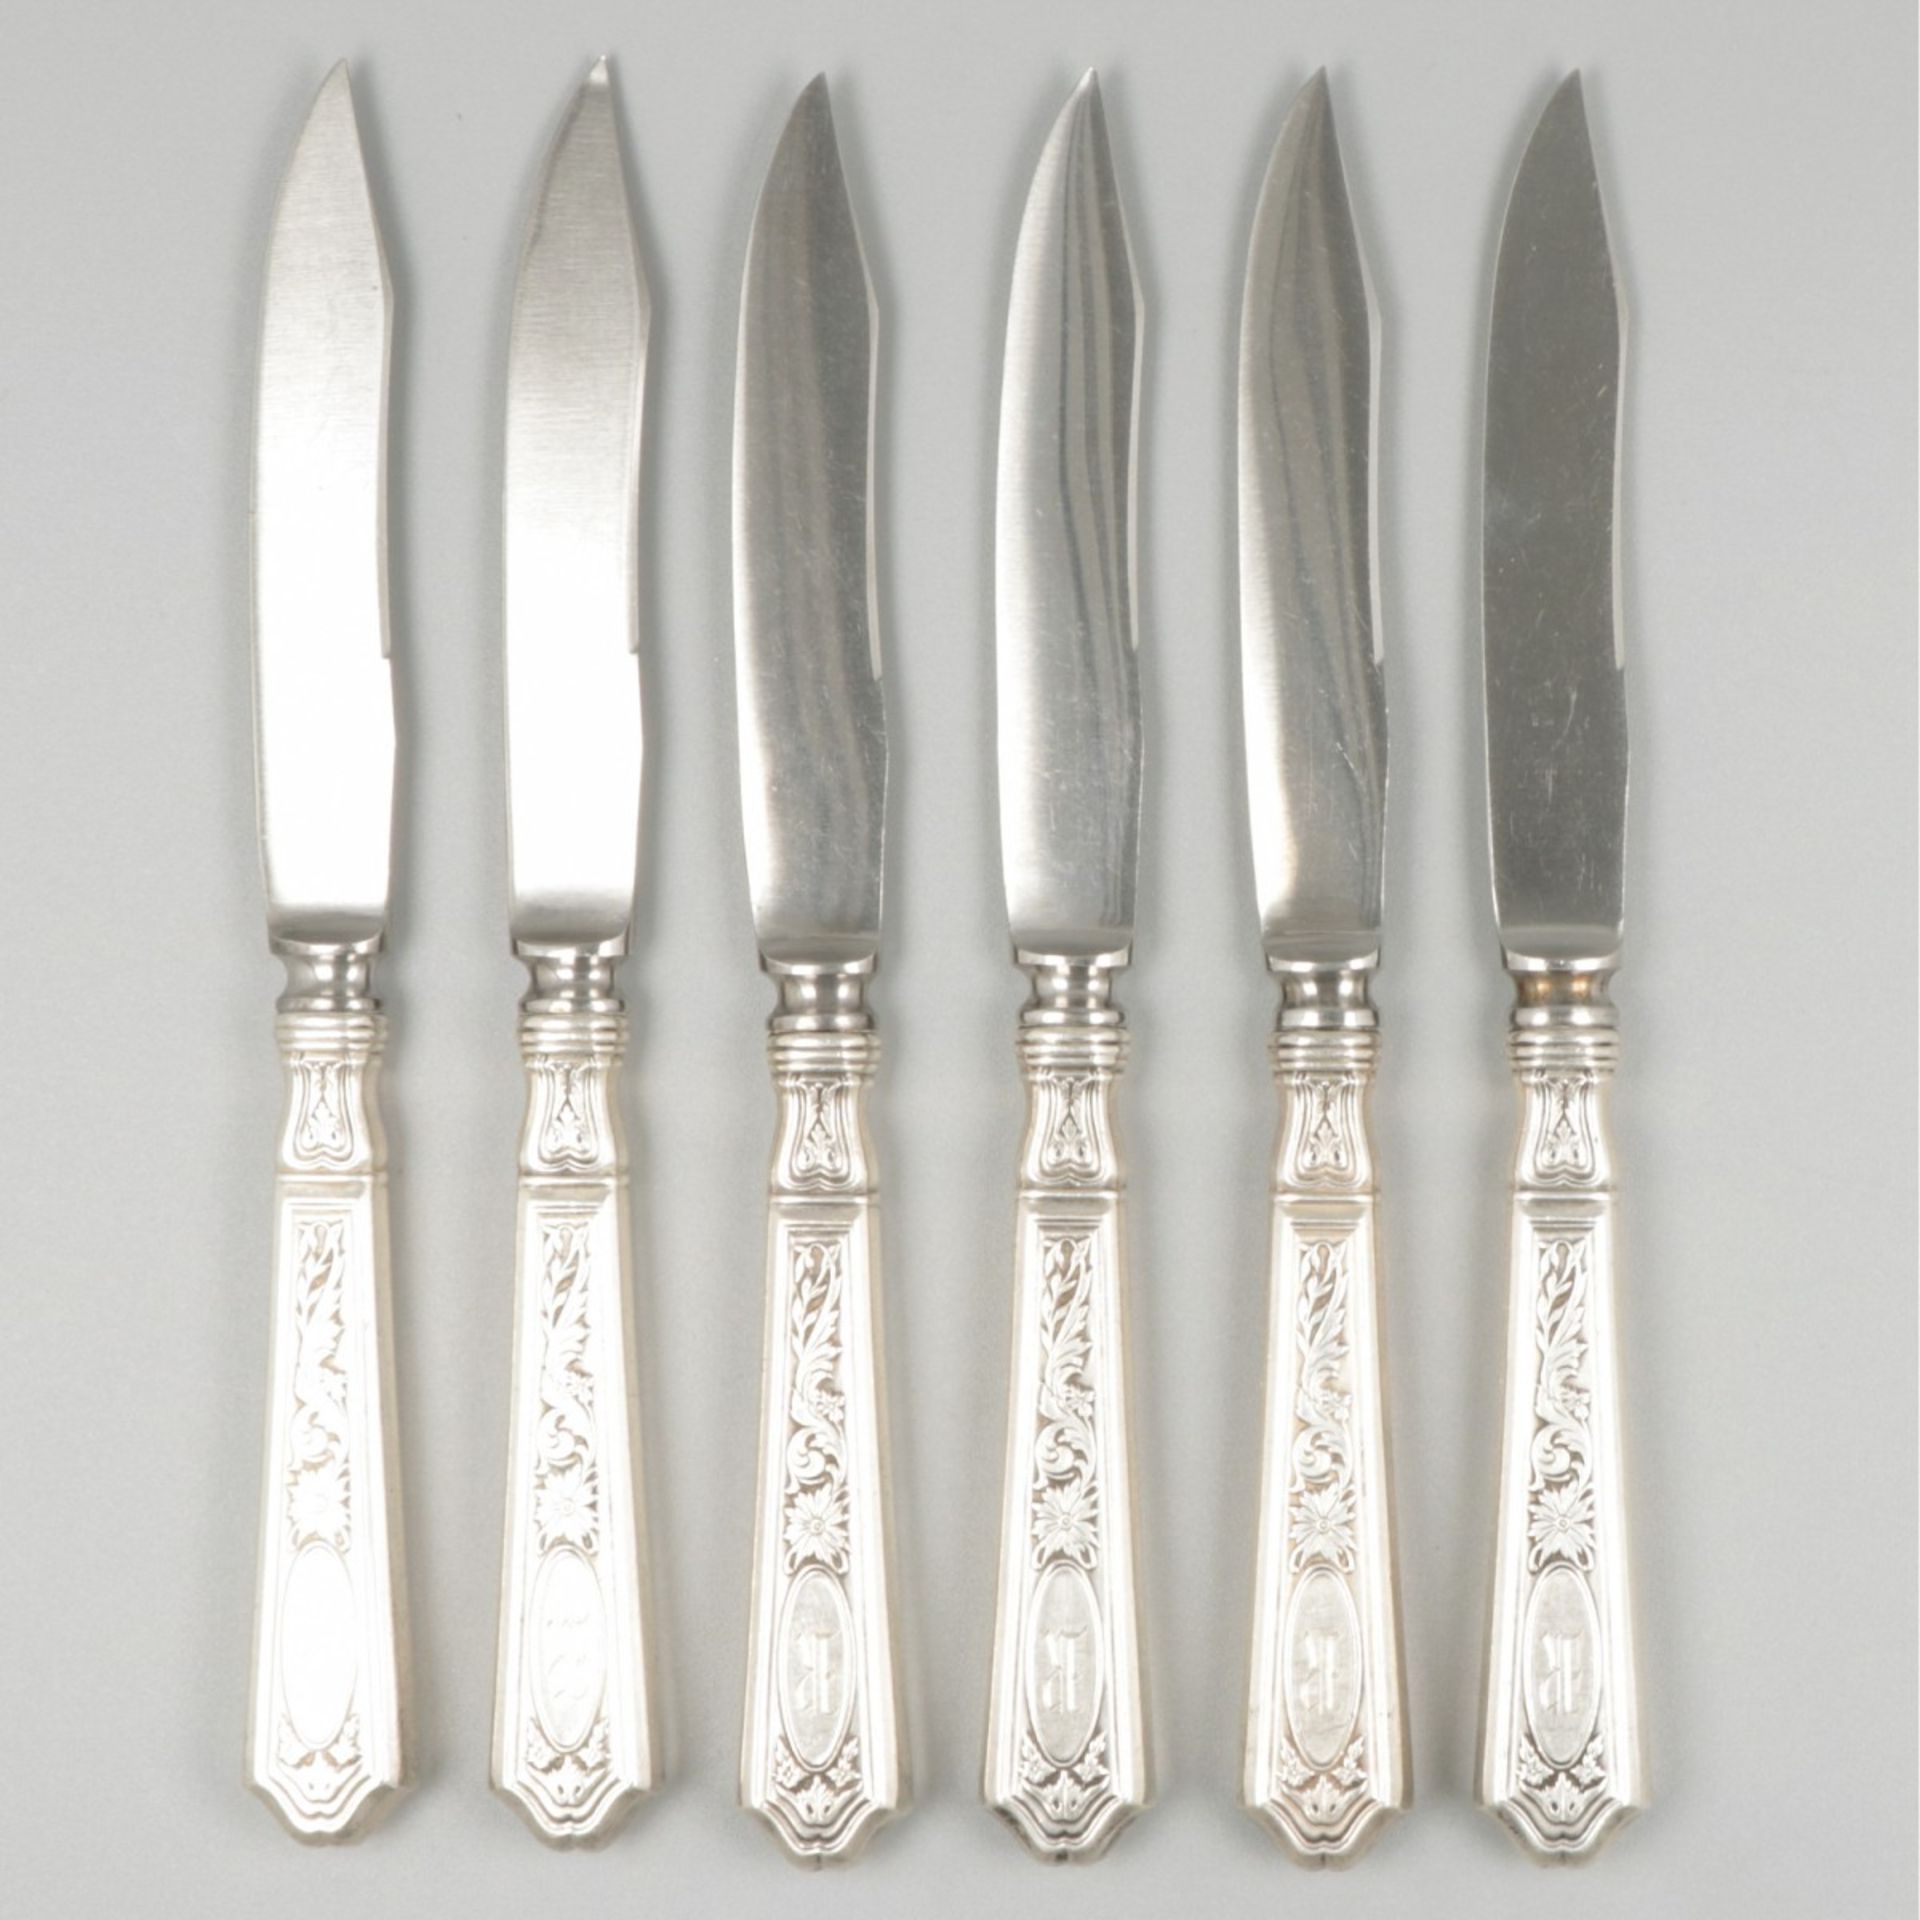 6-piece set of knives silver. - Image 2 of 5